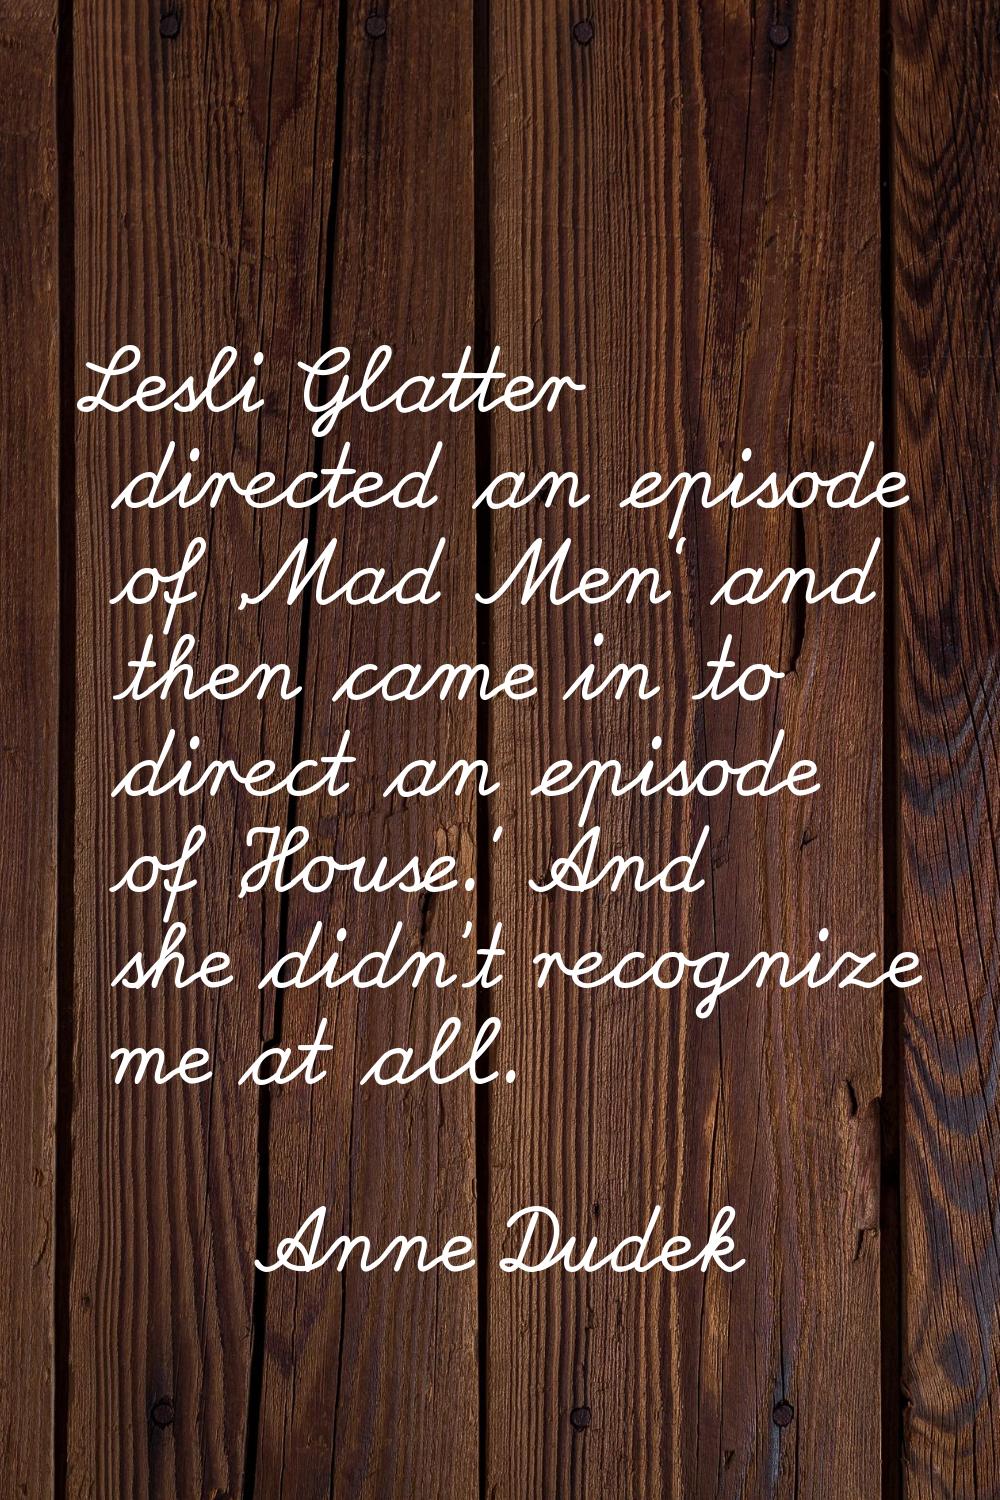 Lesli Glatter directed an episode of 'Mad Men' and then came in to direct an episode of 'House.' An